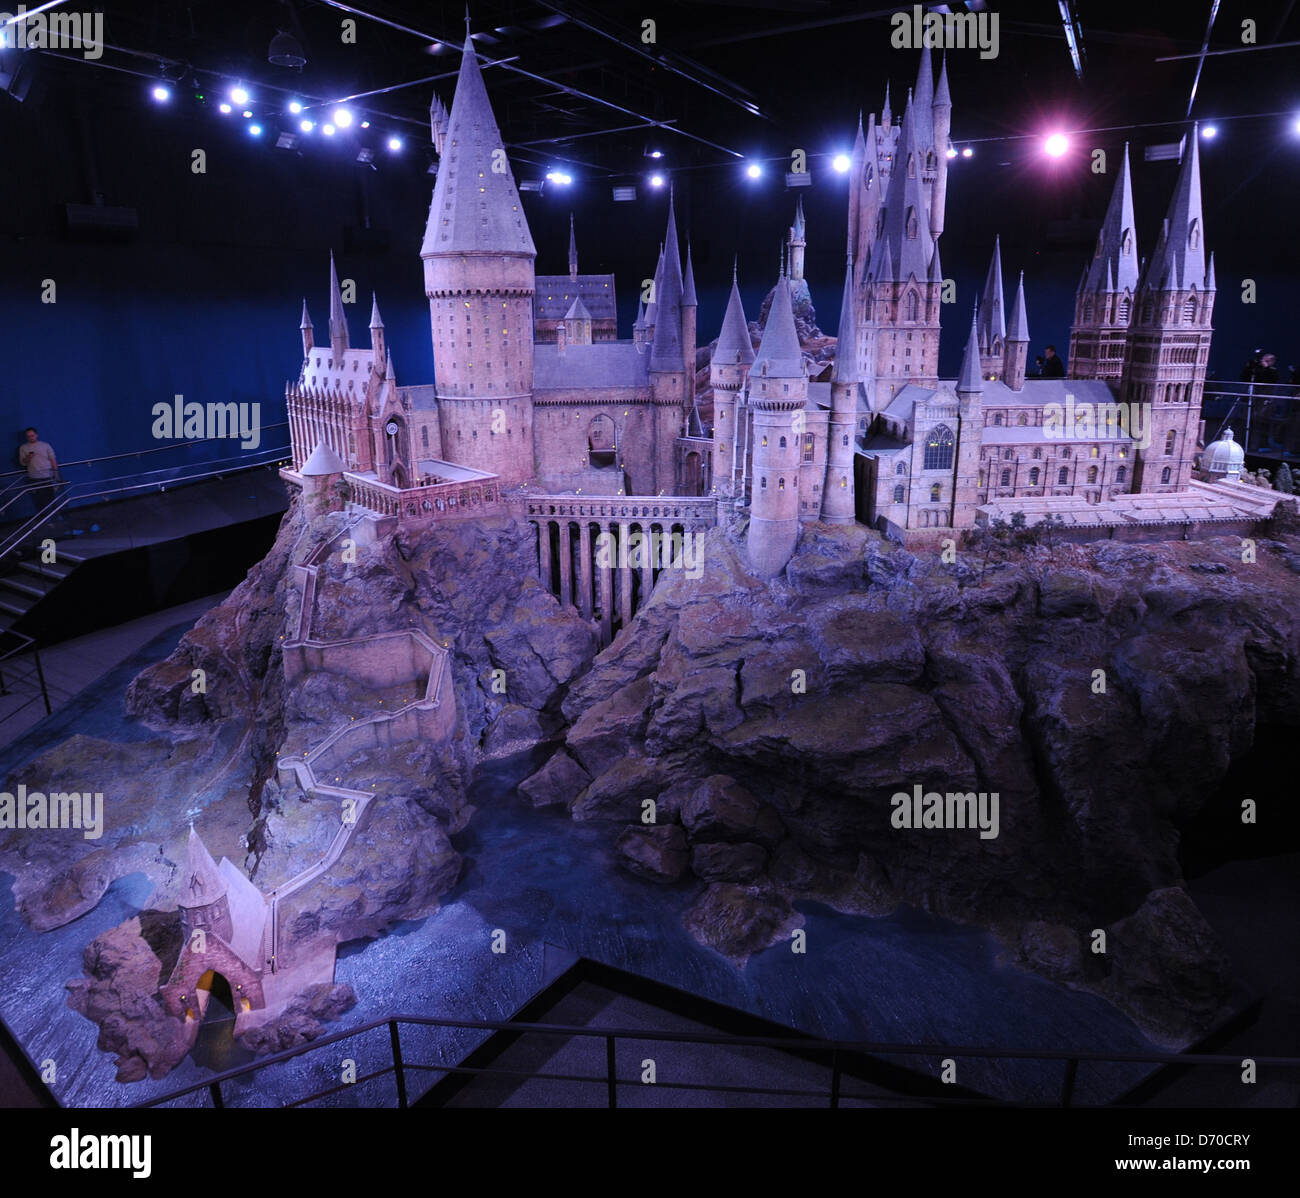 The Making of Harry Potter - Hogwarts Castle scale model media viewing held  at Warner Bros. Studios London London, England Stock Photo - Alamy